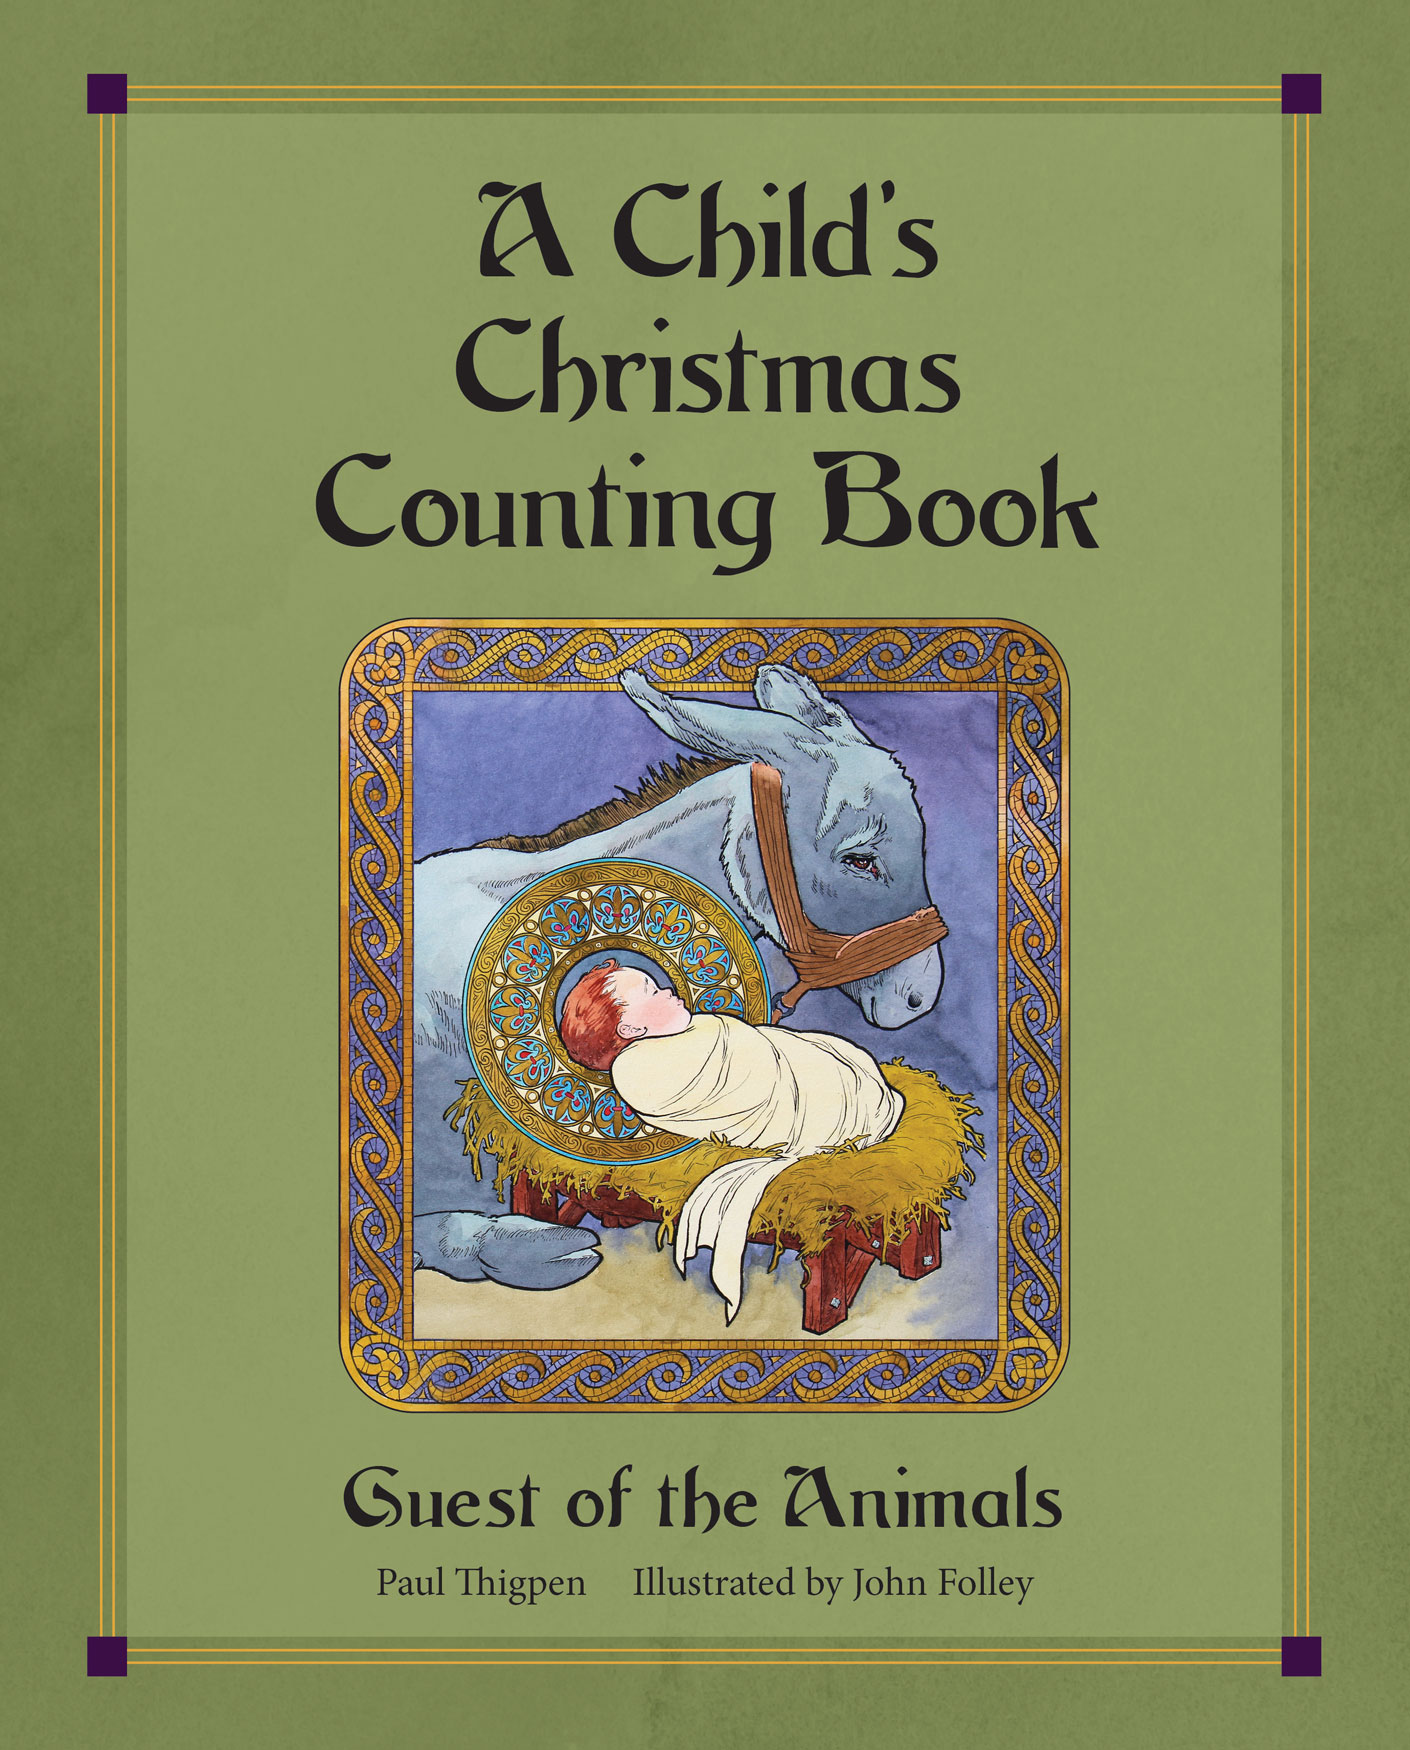 A Child's Christmas Counting Book / Paul Thigpen